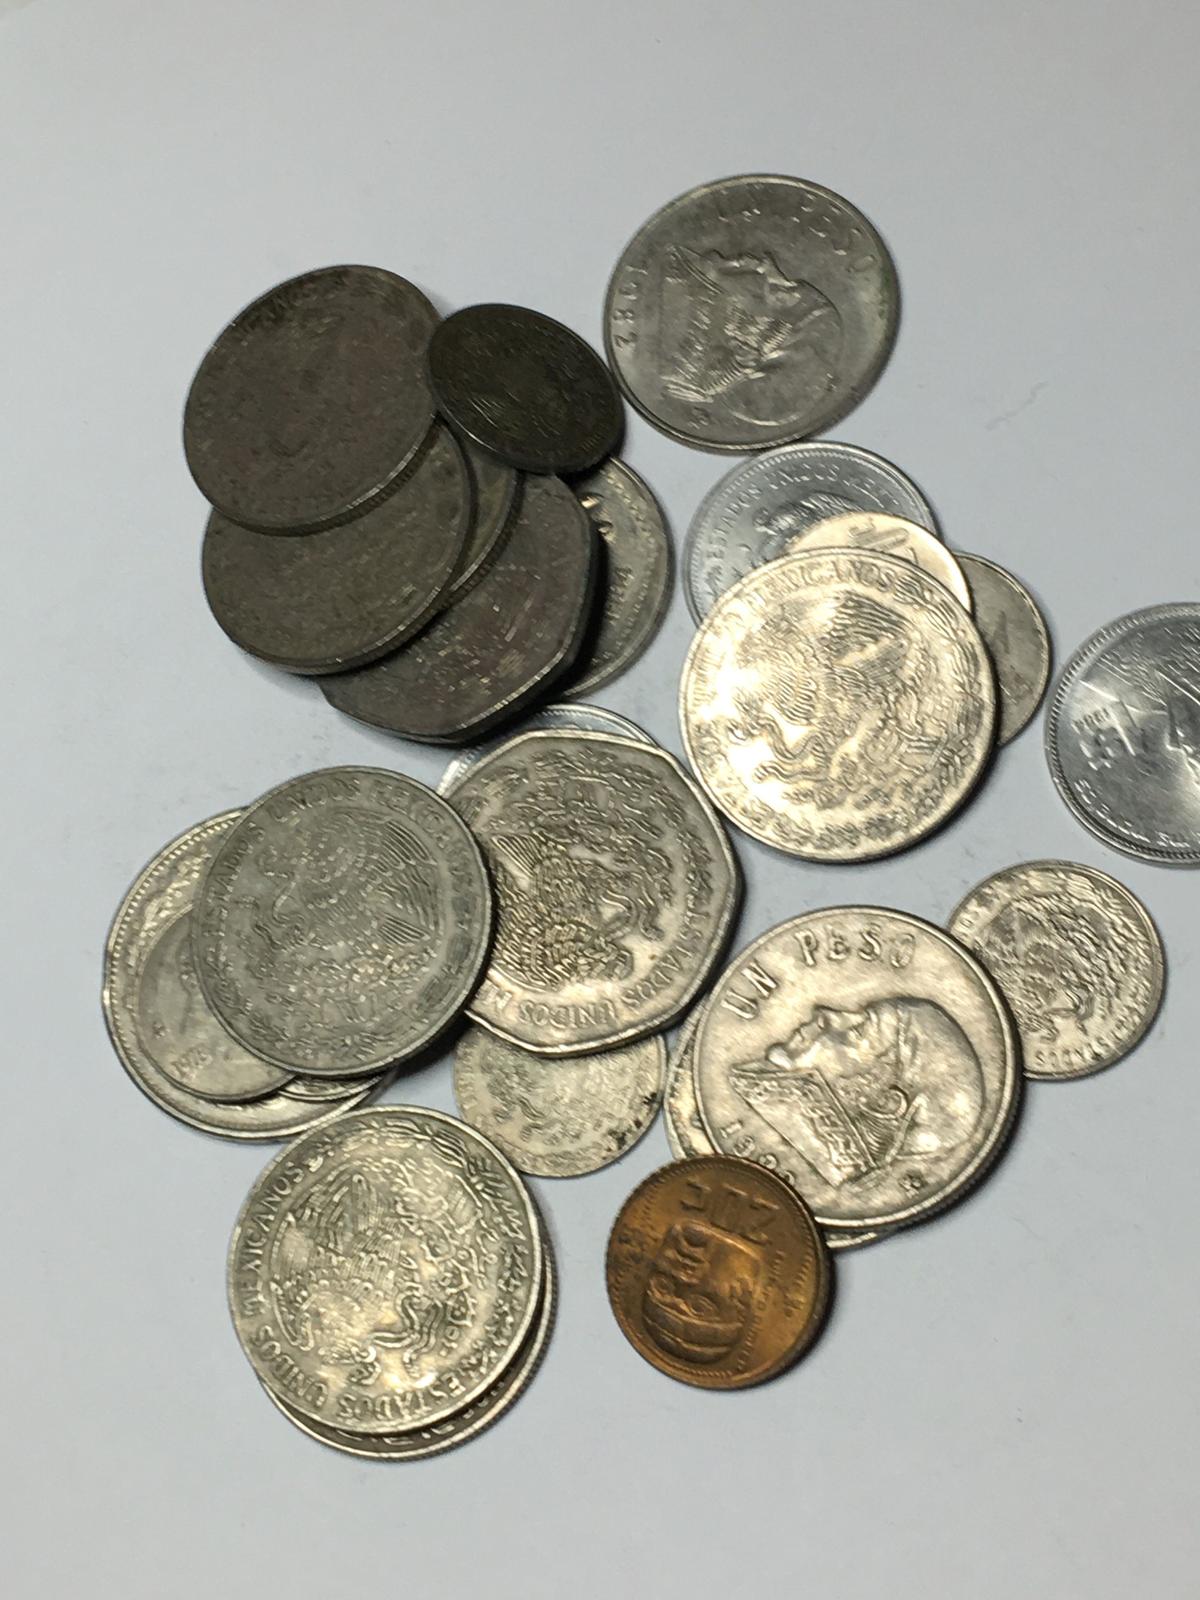 Mexico Vintage Pesos Big Lot 25 Coins 1970 S And 80s